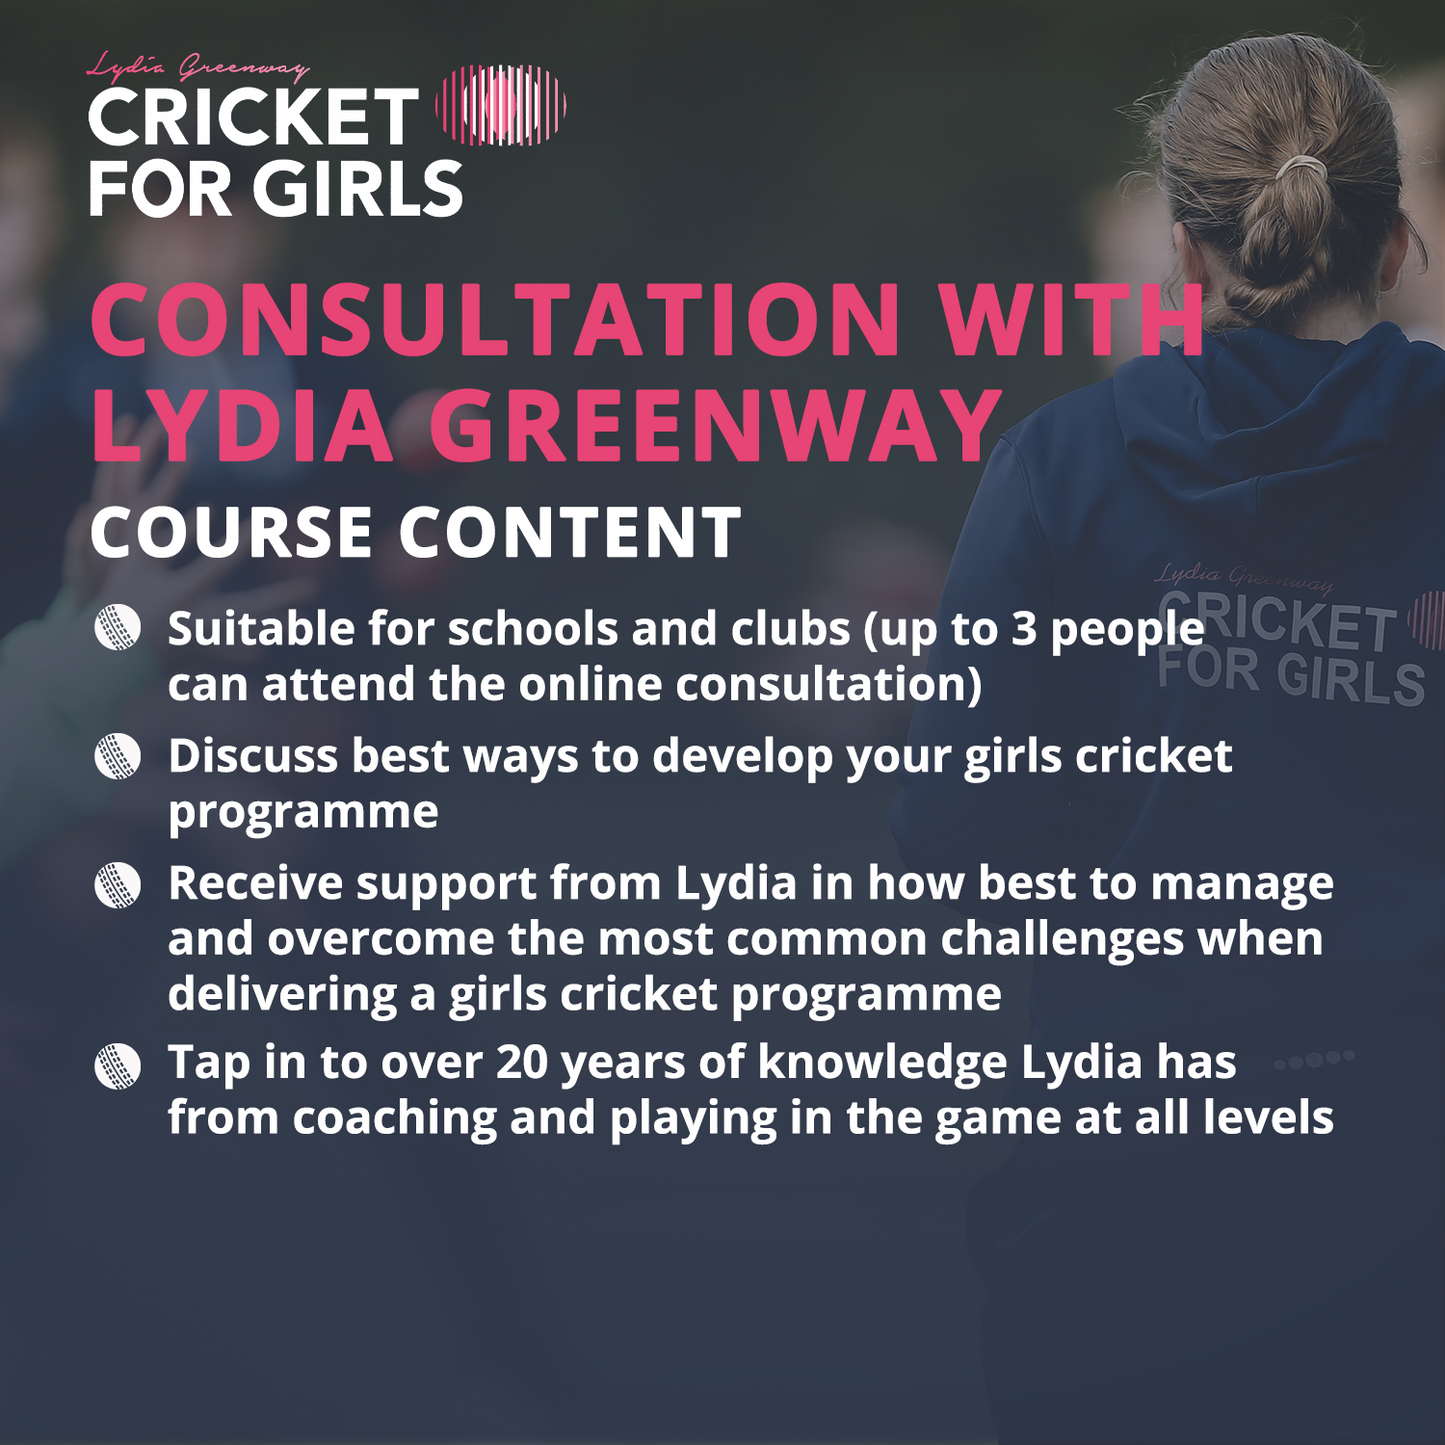 Consultation with Lydia Greenway